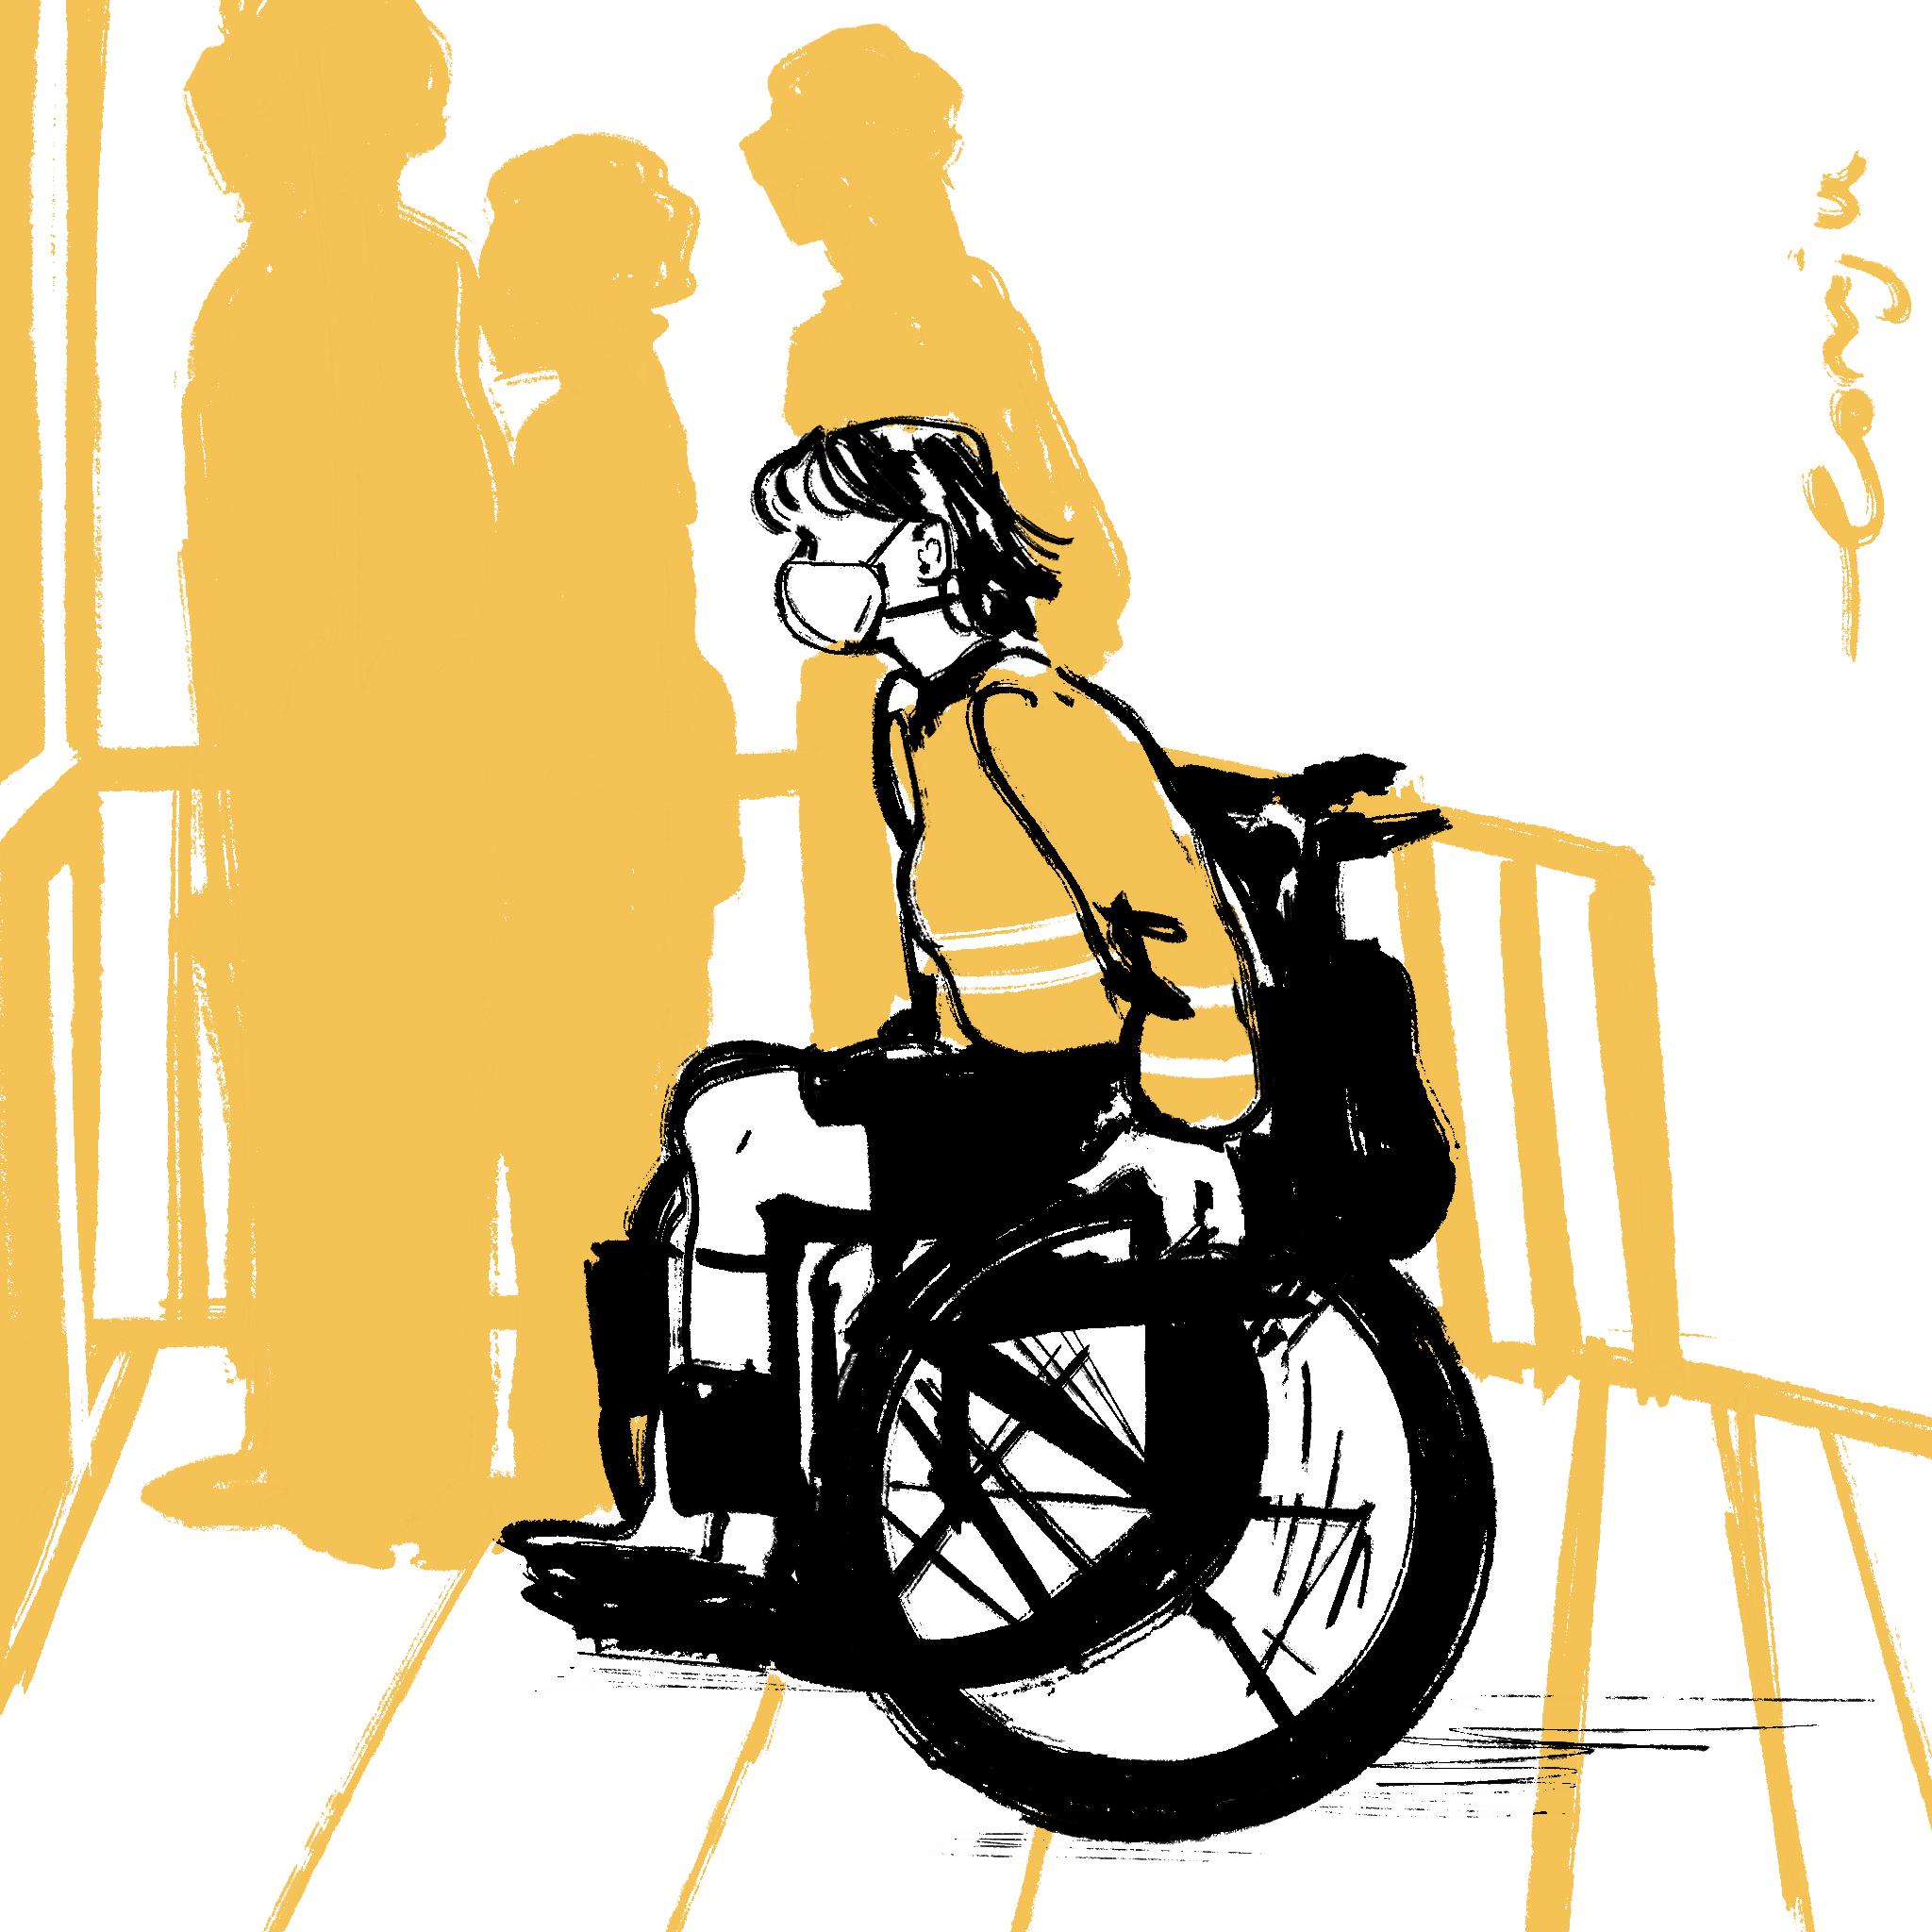 An illustration of a wheel-chair user